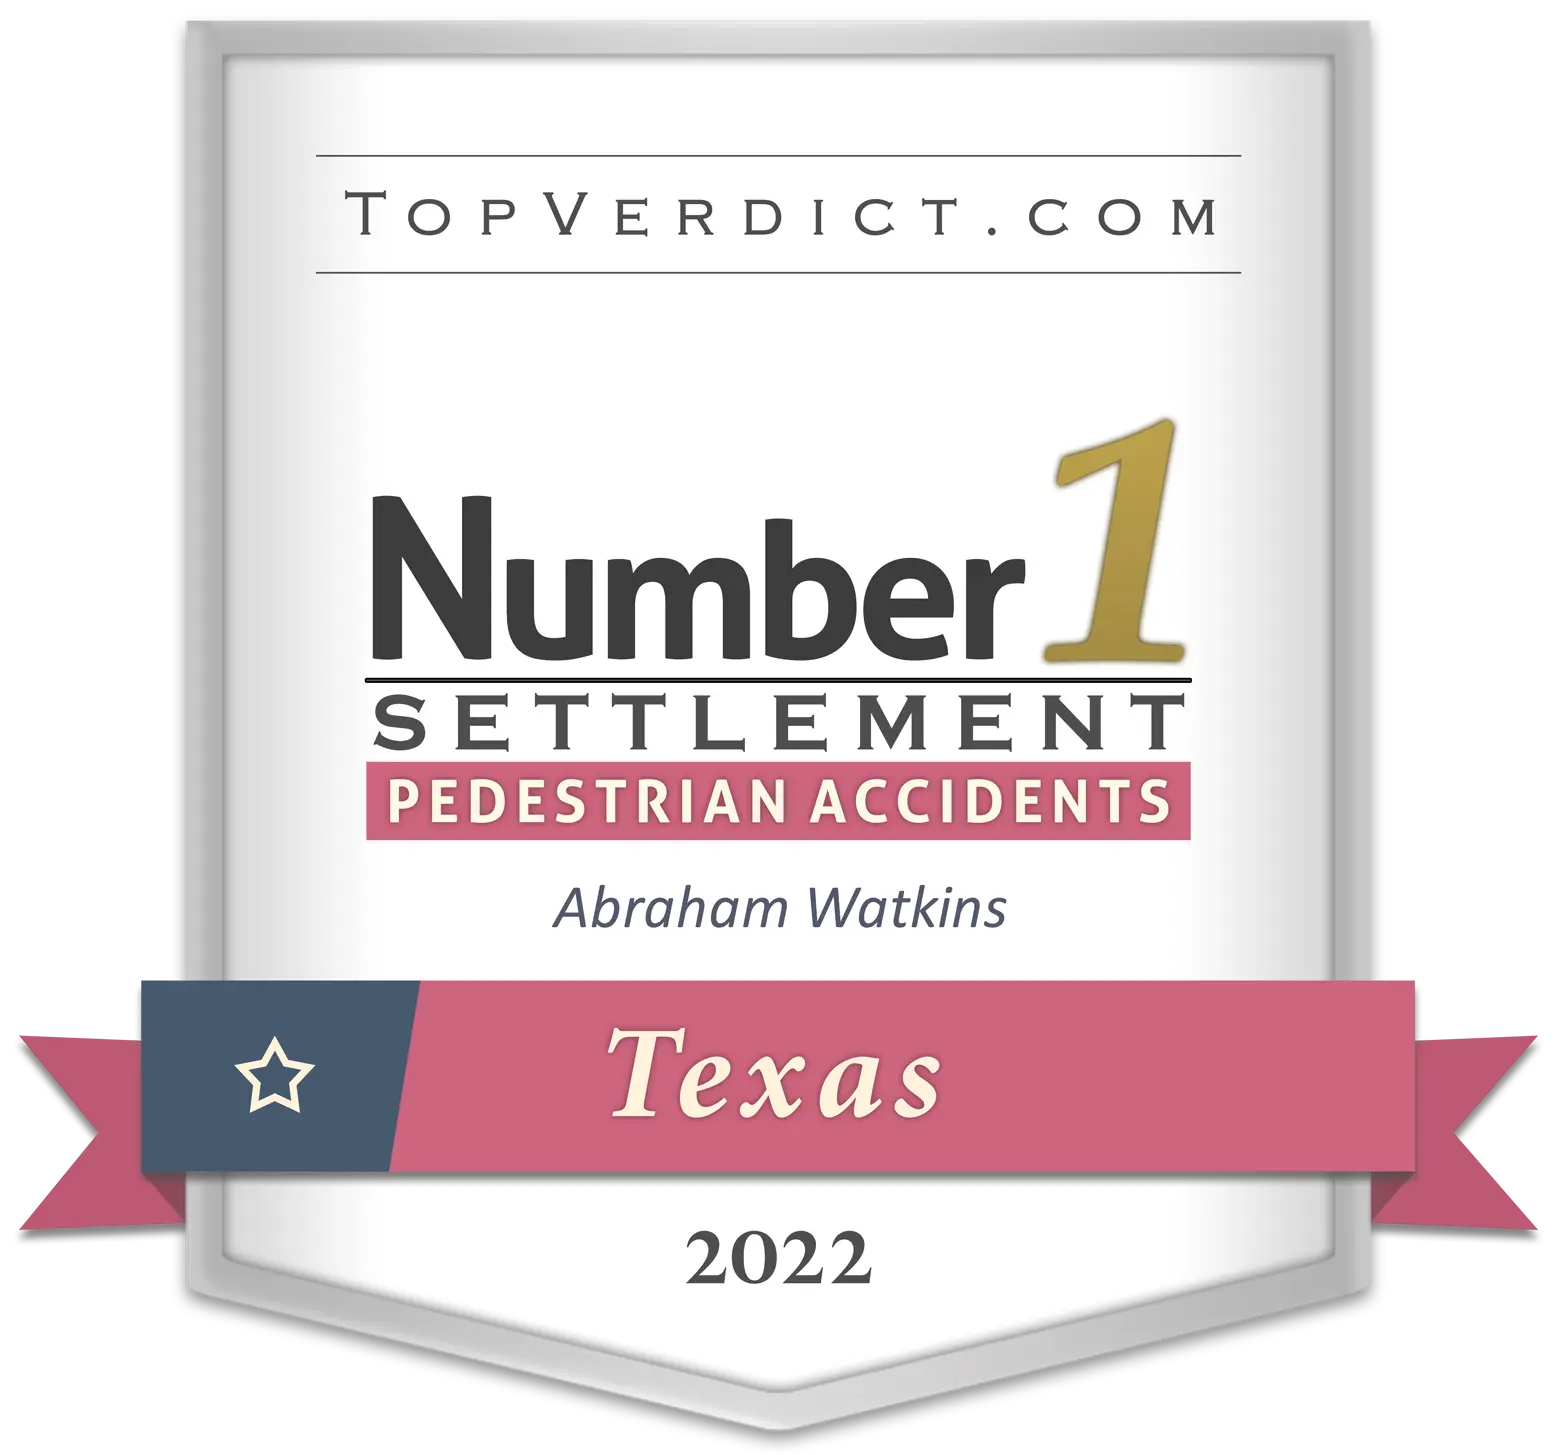 Number 1 for Pedestrian Accident Settlements in TX for 2022.